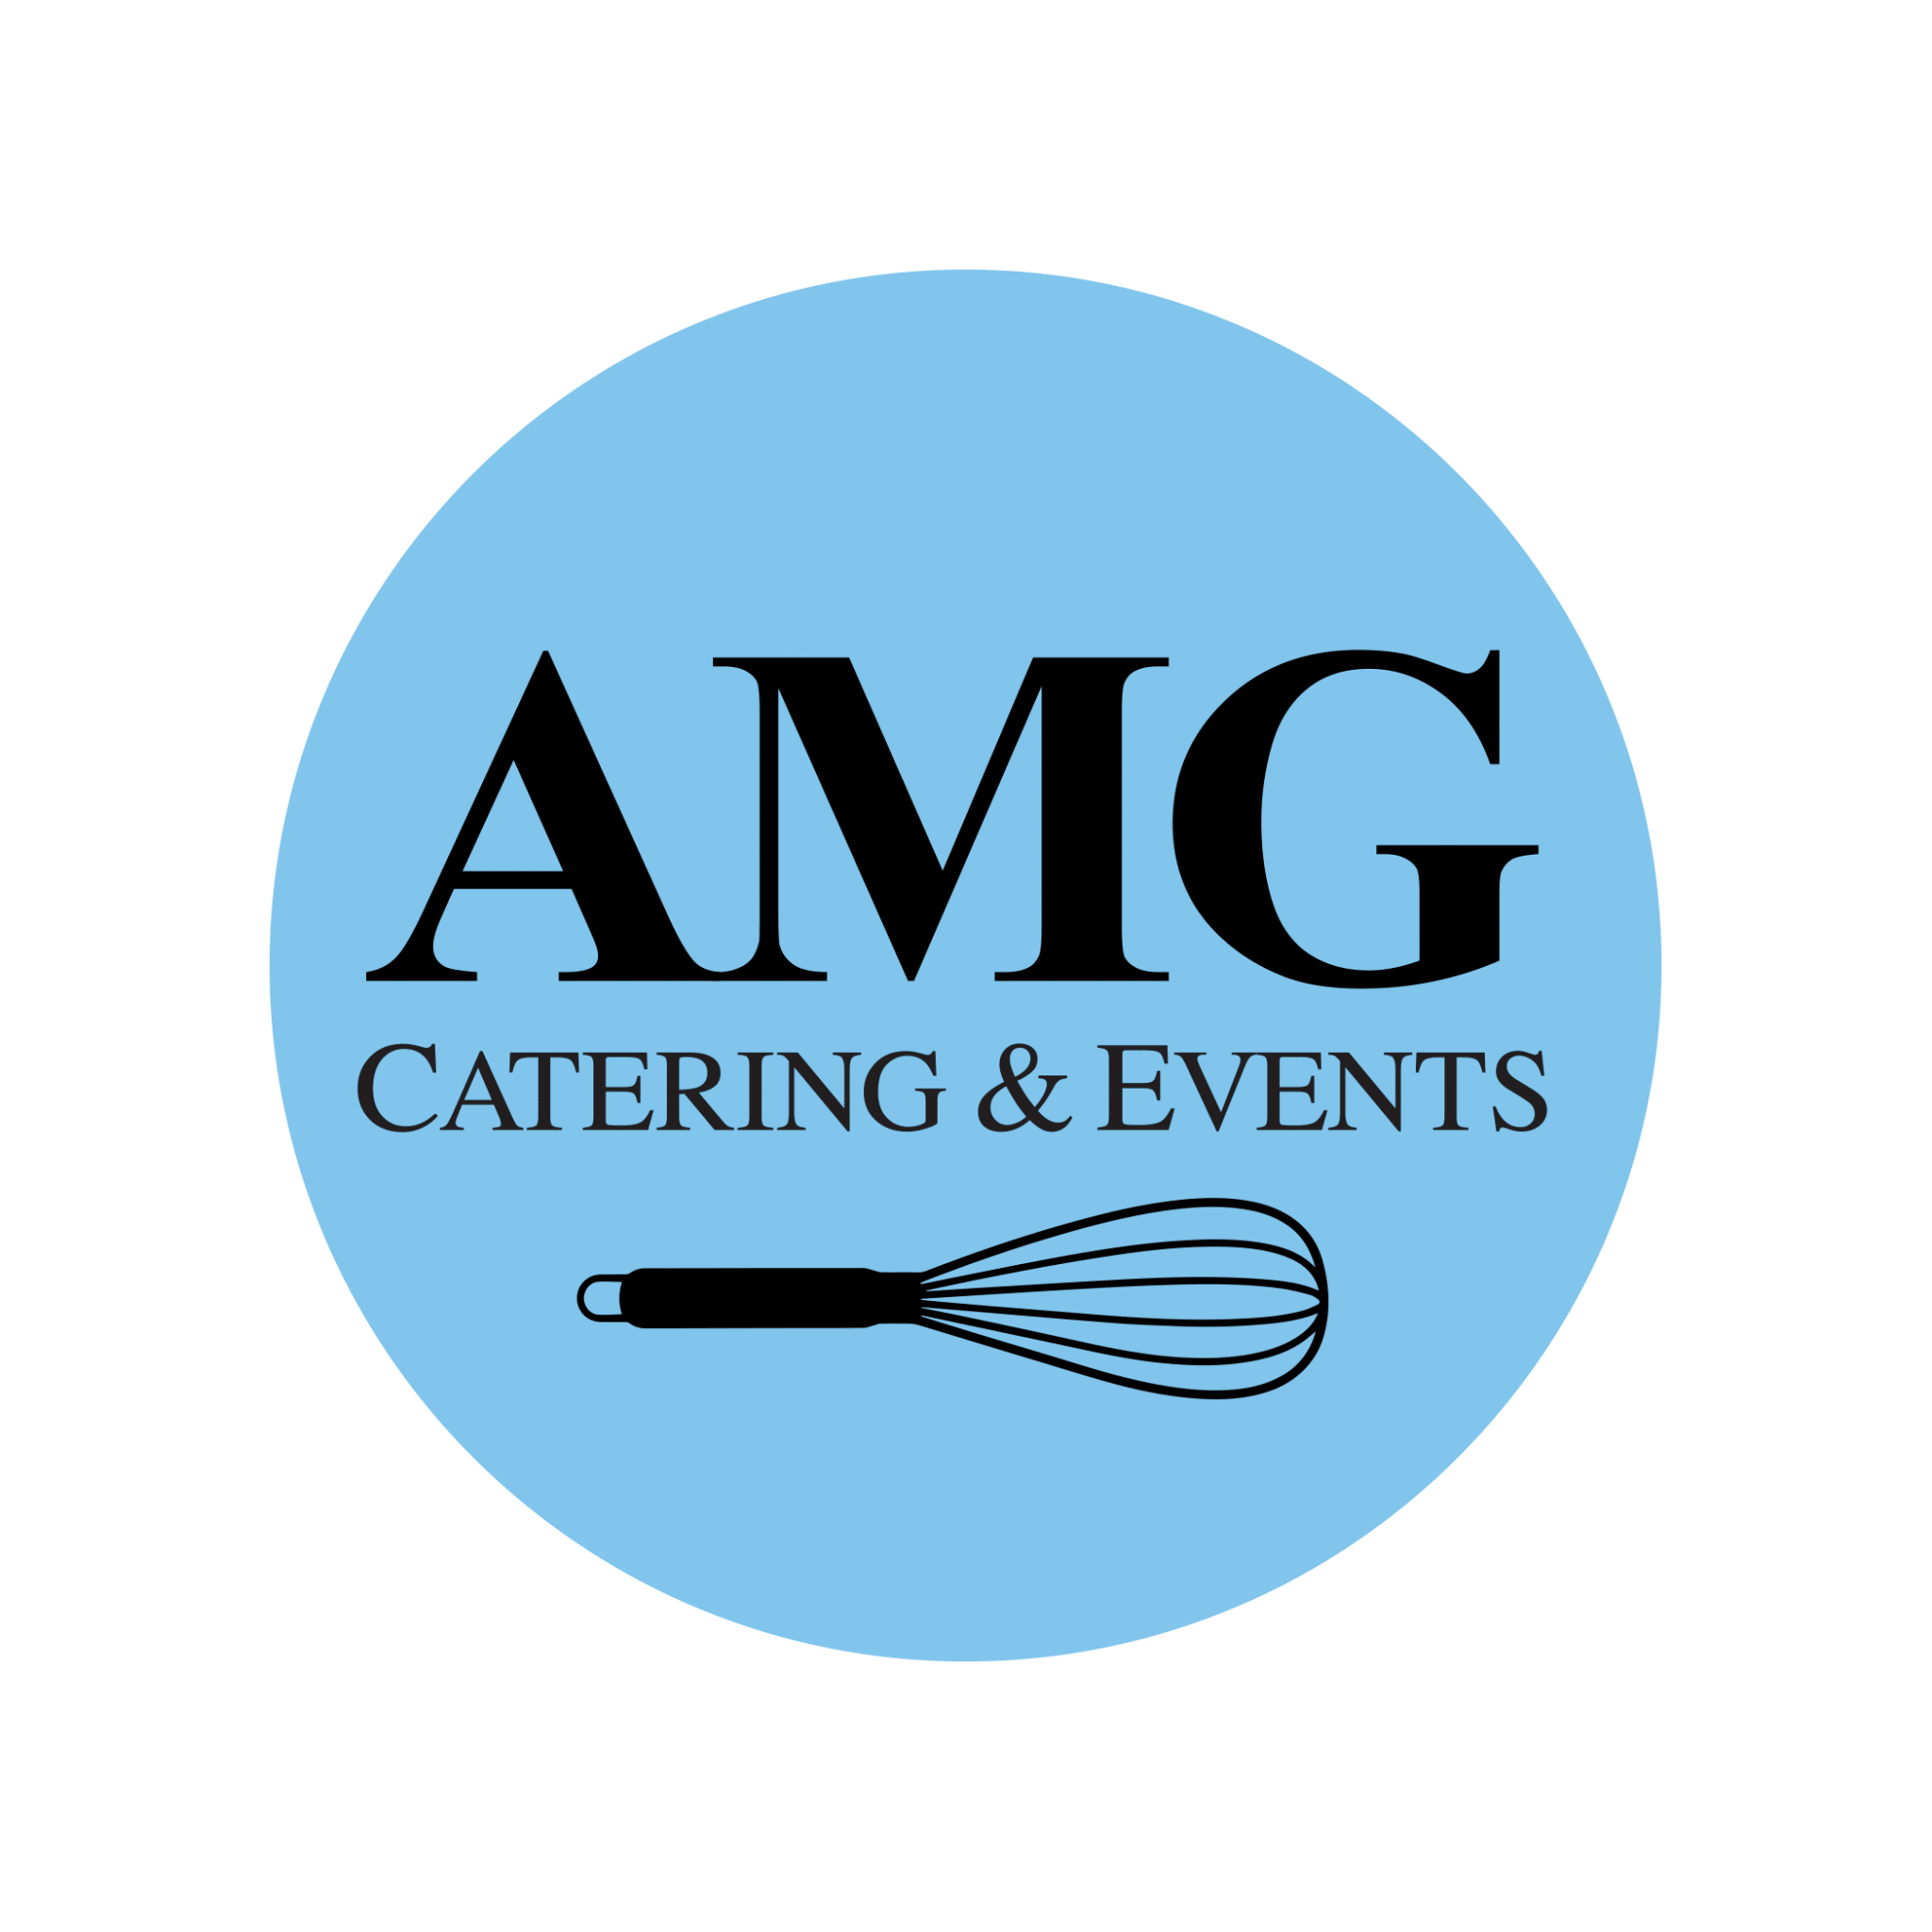 AMG Catering & Events